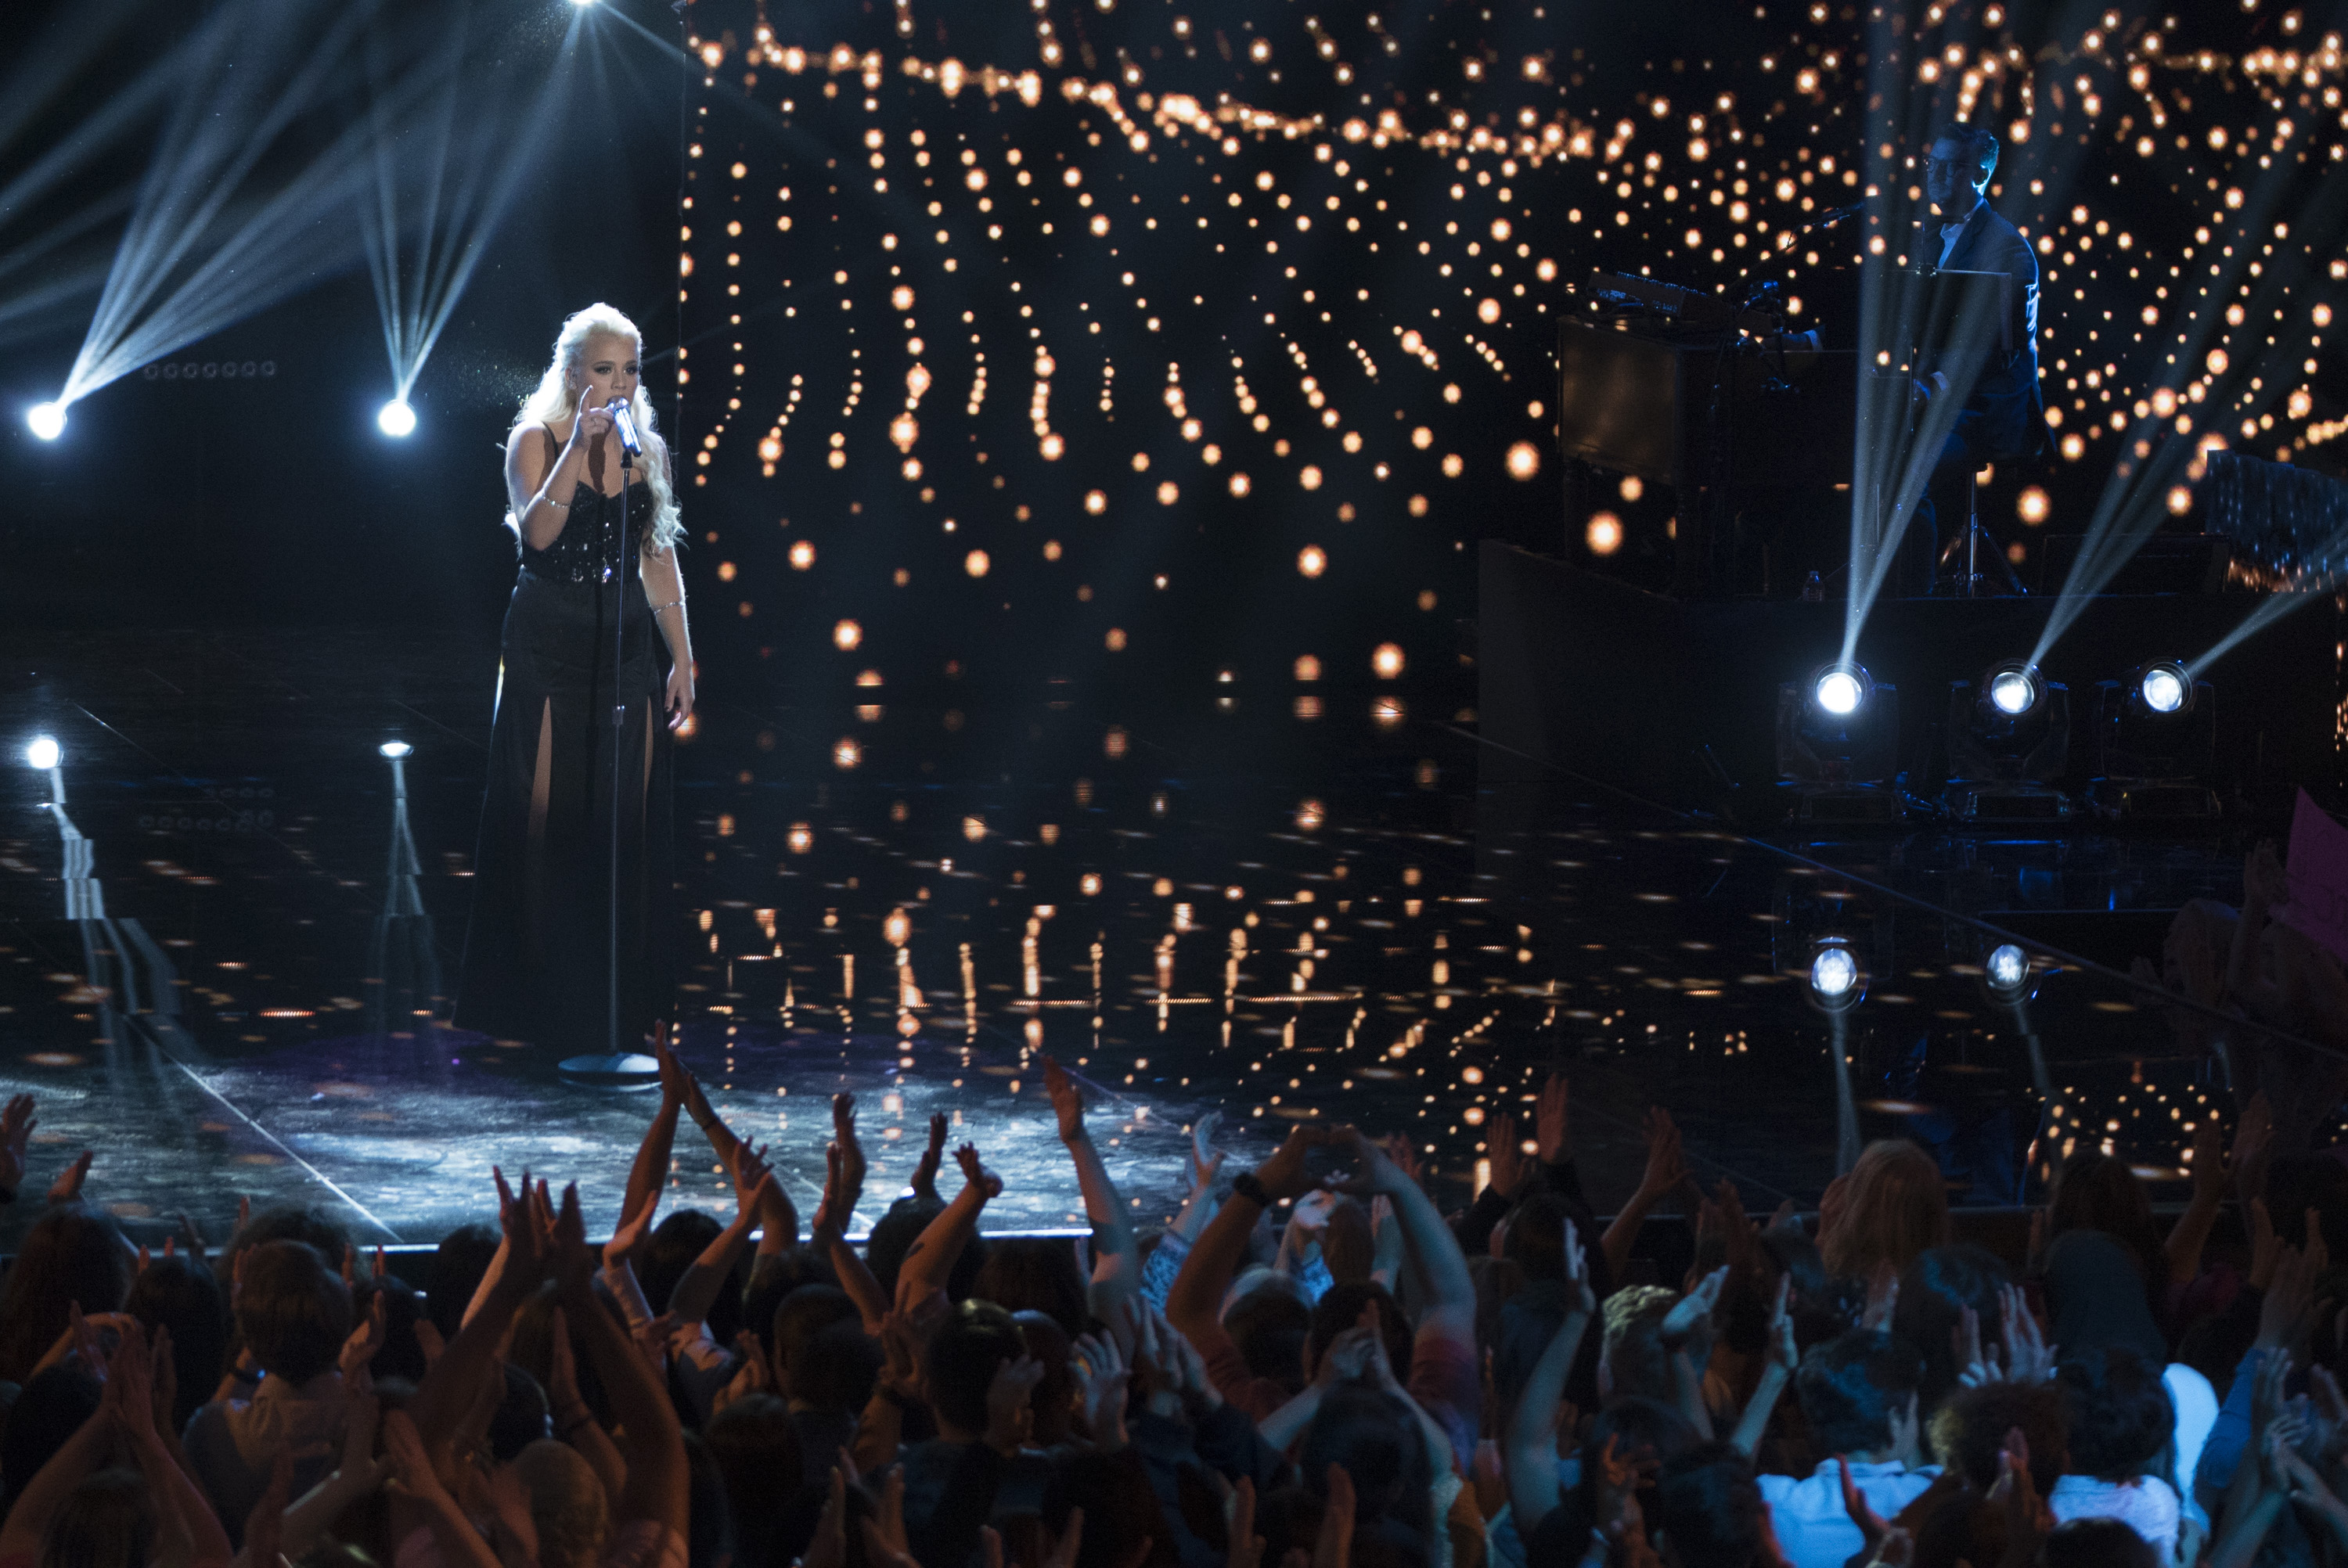 Gabby Barrett on American Idol which aired live on ABC on May 6, 2018.
Photo credit: American Idol
